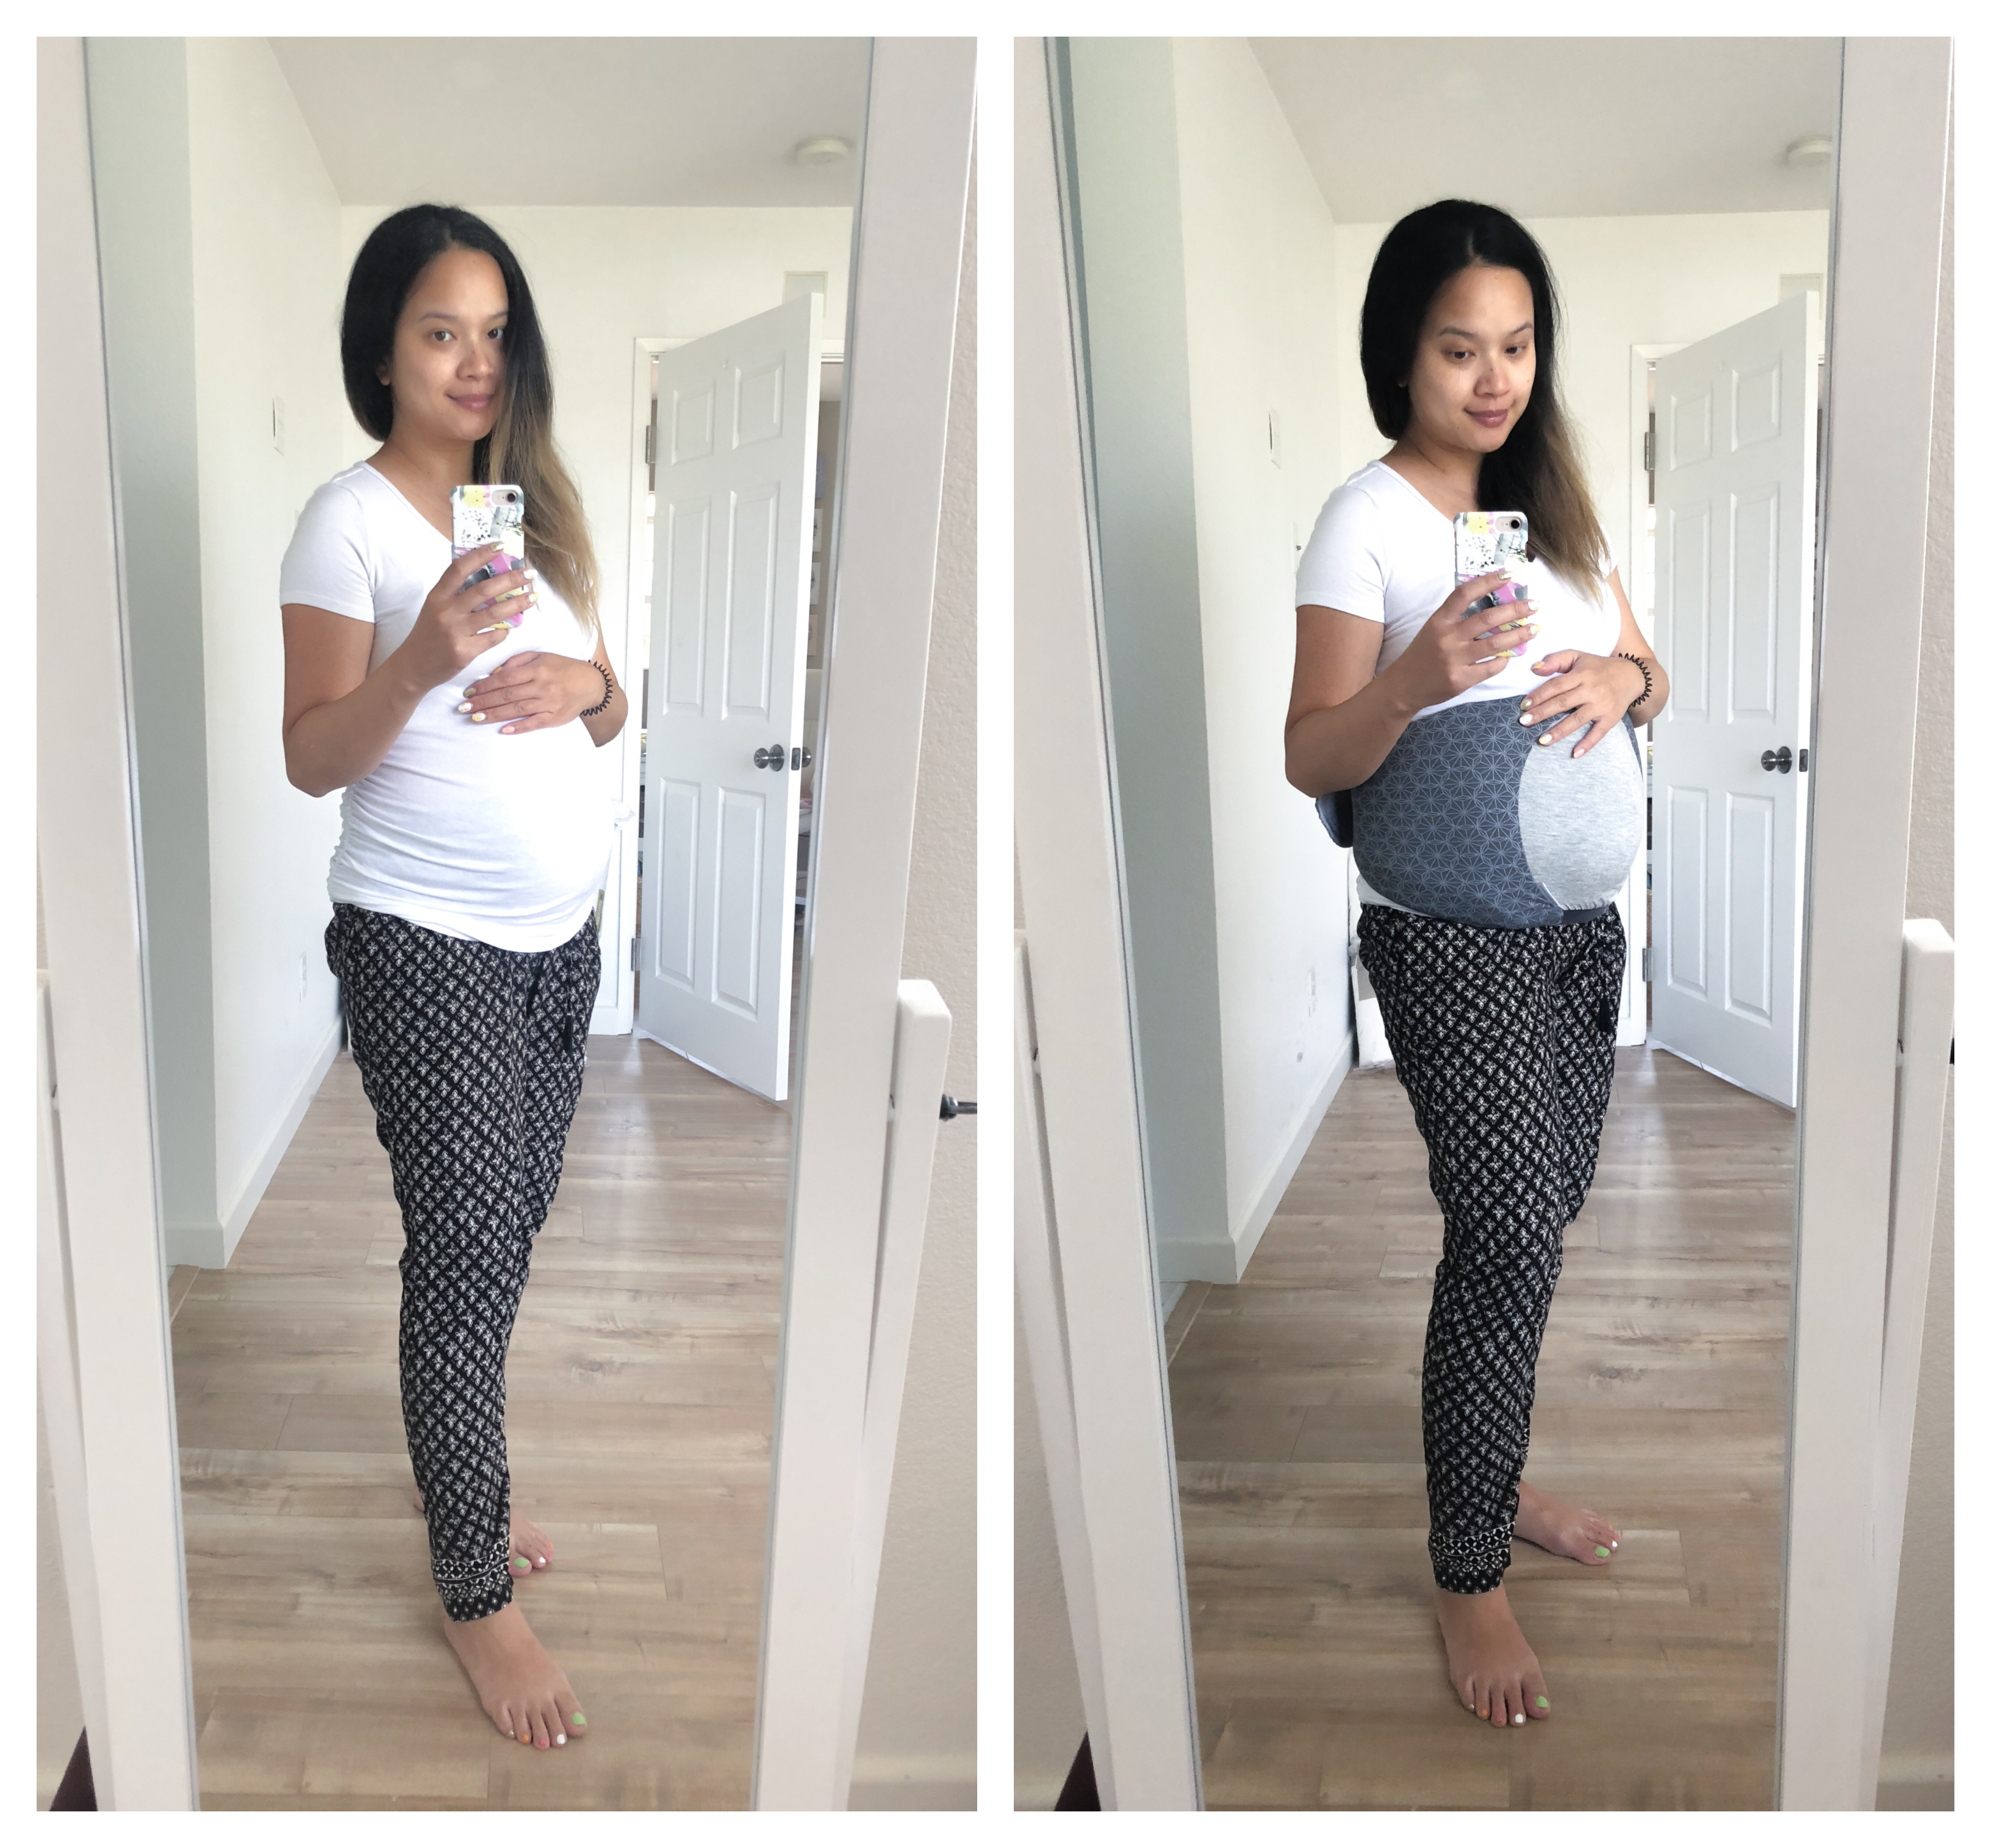 Pregnancy Travel Must-Haves for Flying